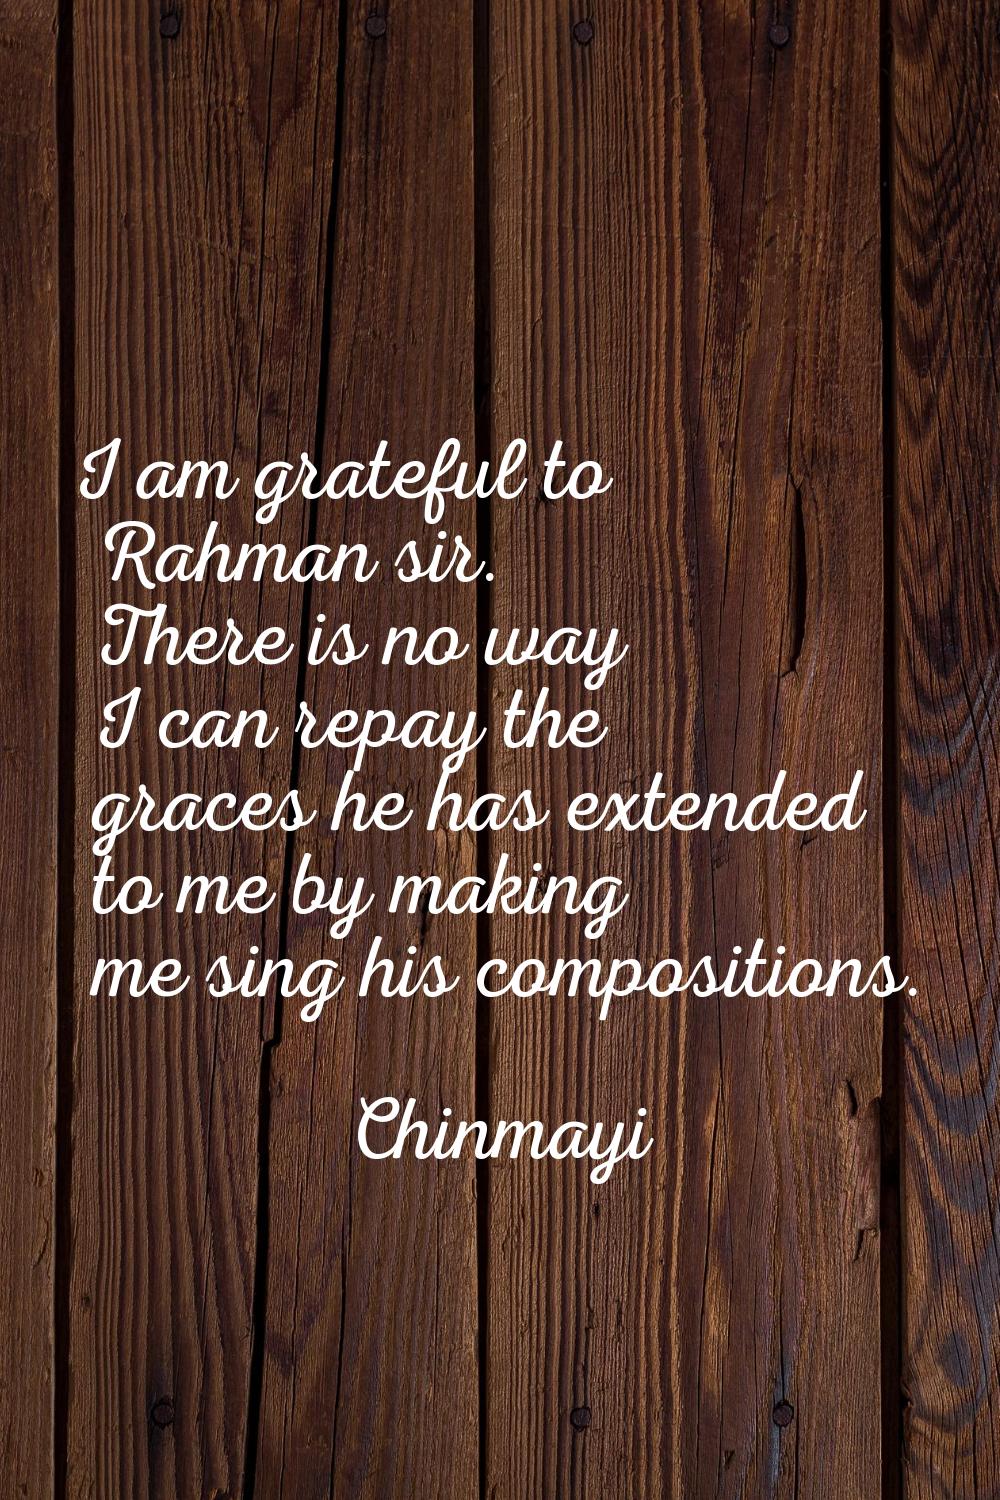 I am grateful to Rahman sir. There is no way I can repay the graces he has extended to me by making